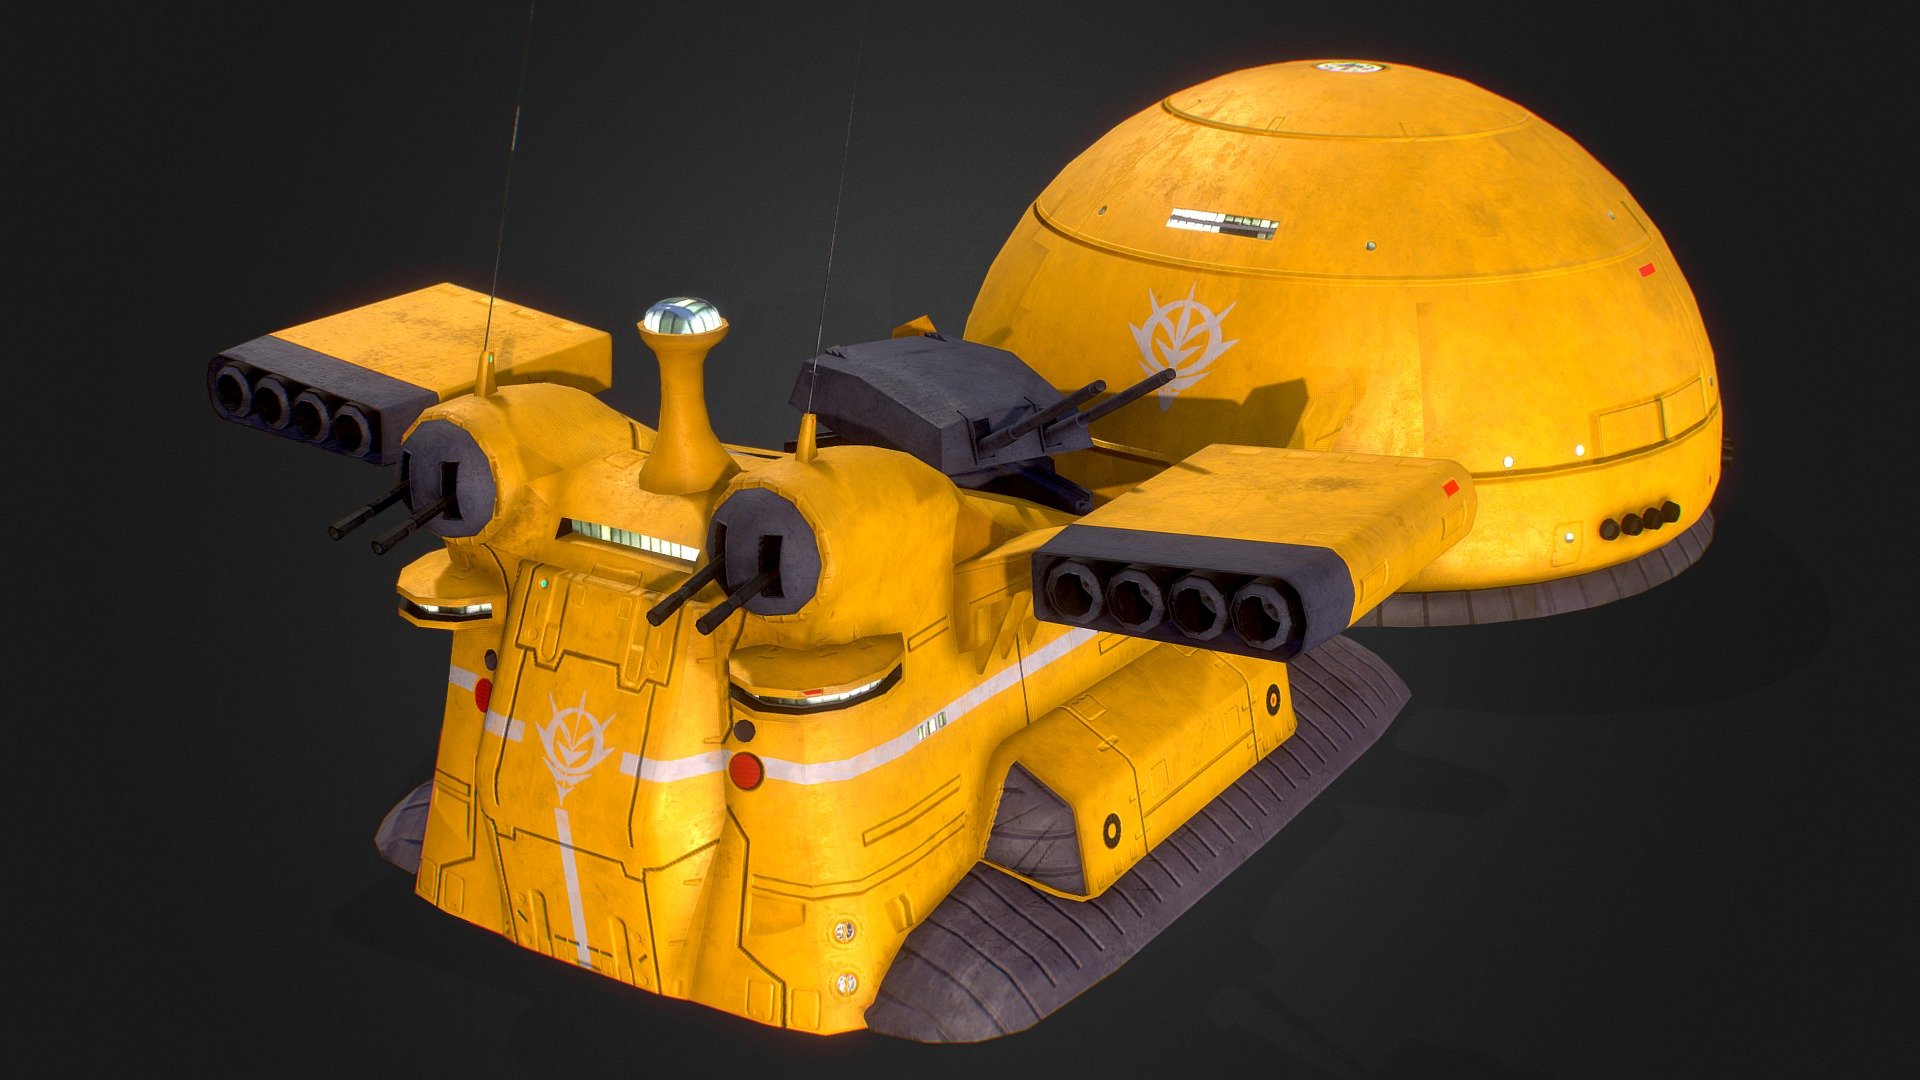 This model was made for One Year War mod of Hearts of Iron IV.

Our Mod Steam Home Page

https://steamcommunity.com/sharedfiles/filedetails/?id=2064985570 - Zeon Land Battleship Gallop - 3D model by One Year War Mod (@hoi4oneyearwar) 3d model